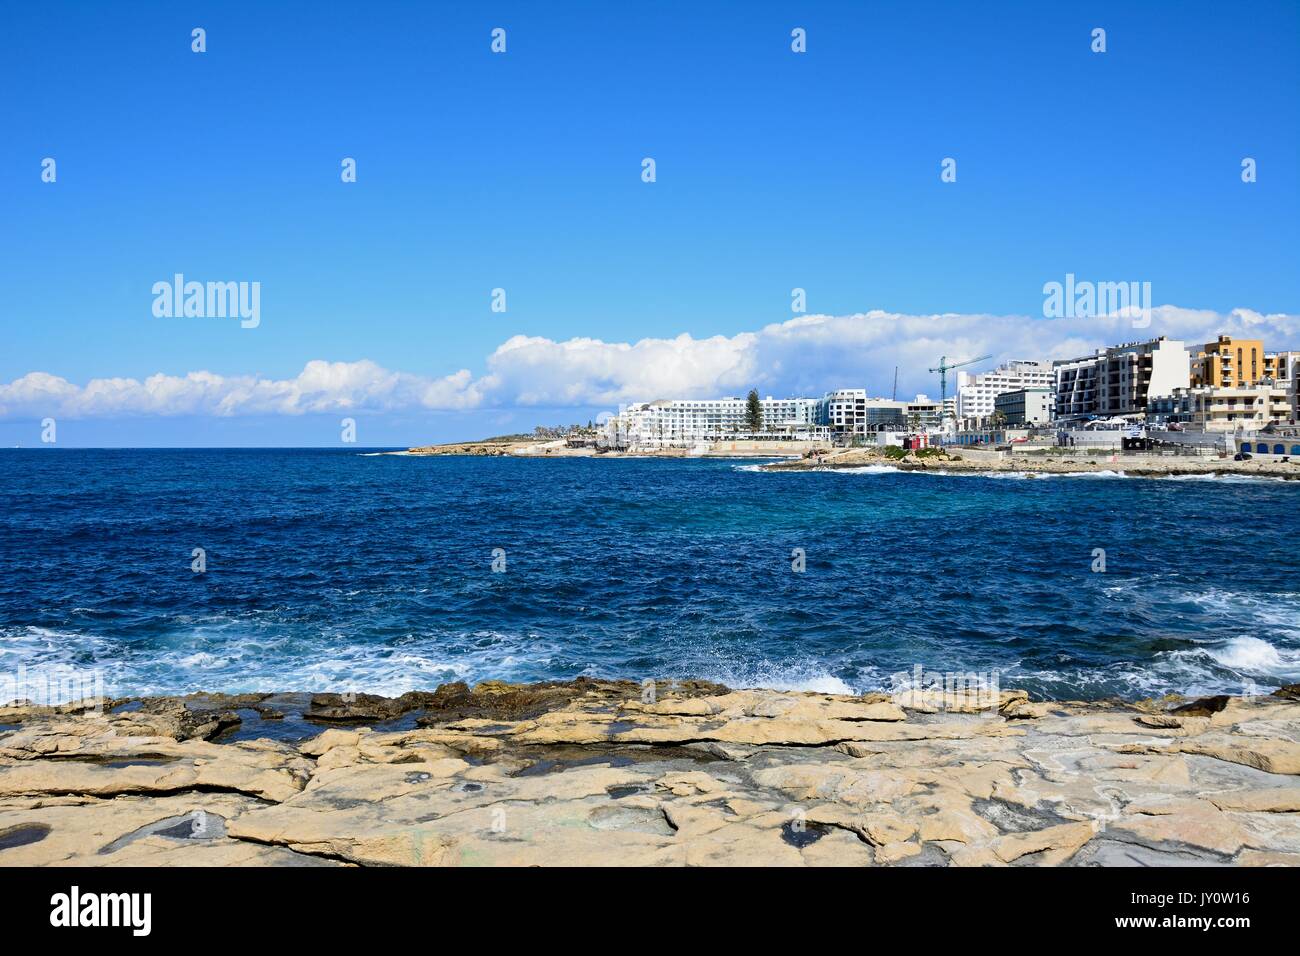 View of the rocky coastline with hotels and apartments to the rear, Bugibba, Malta, Europe. Stock Photo